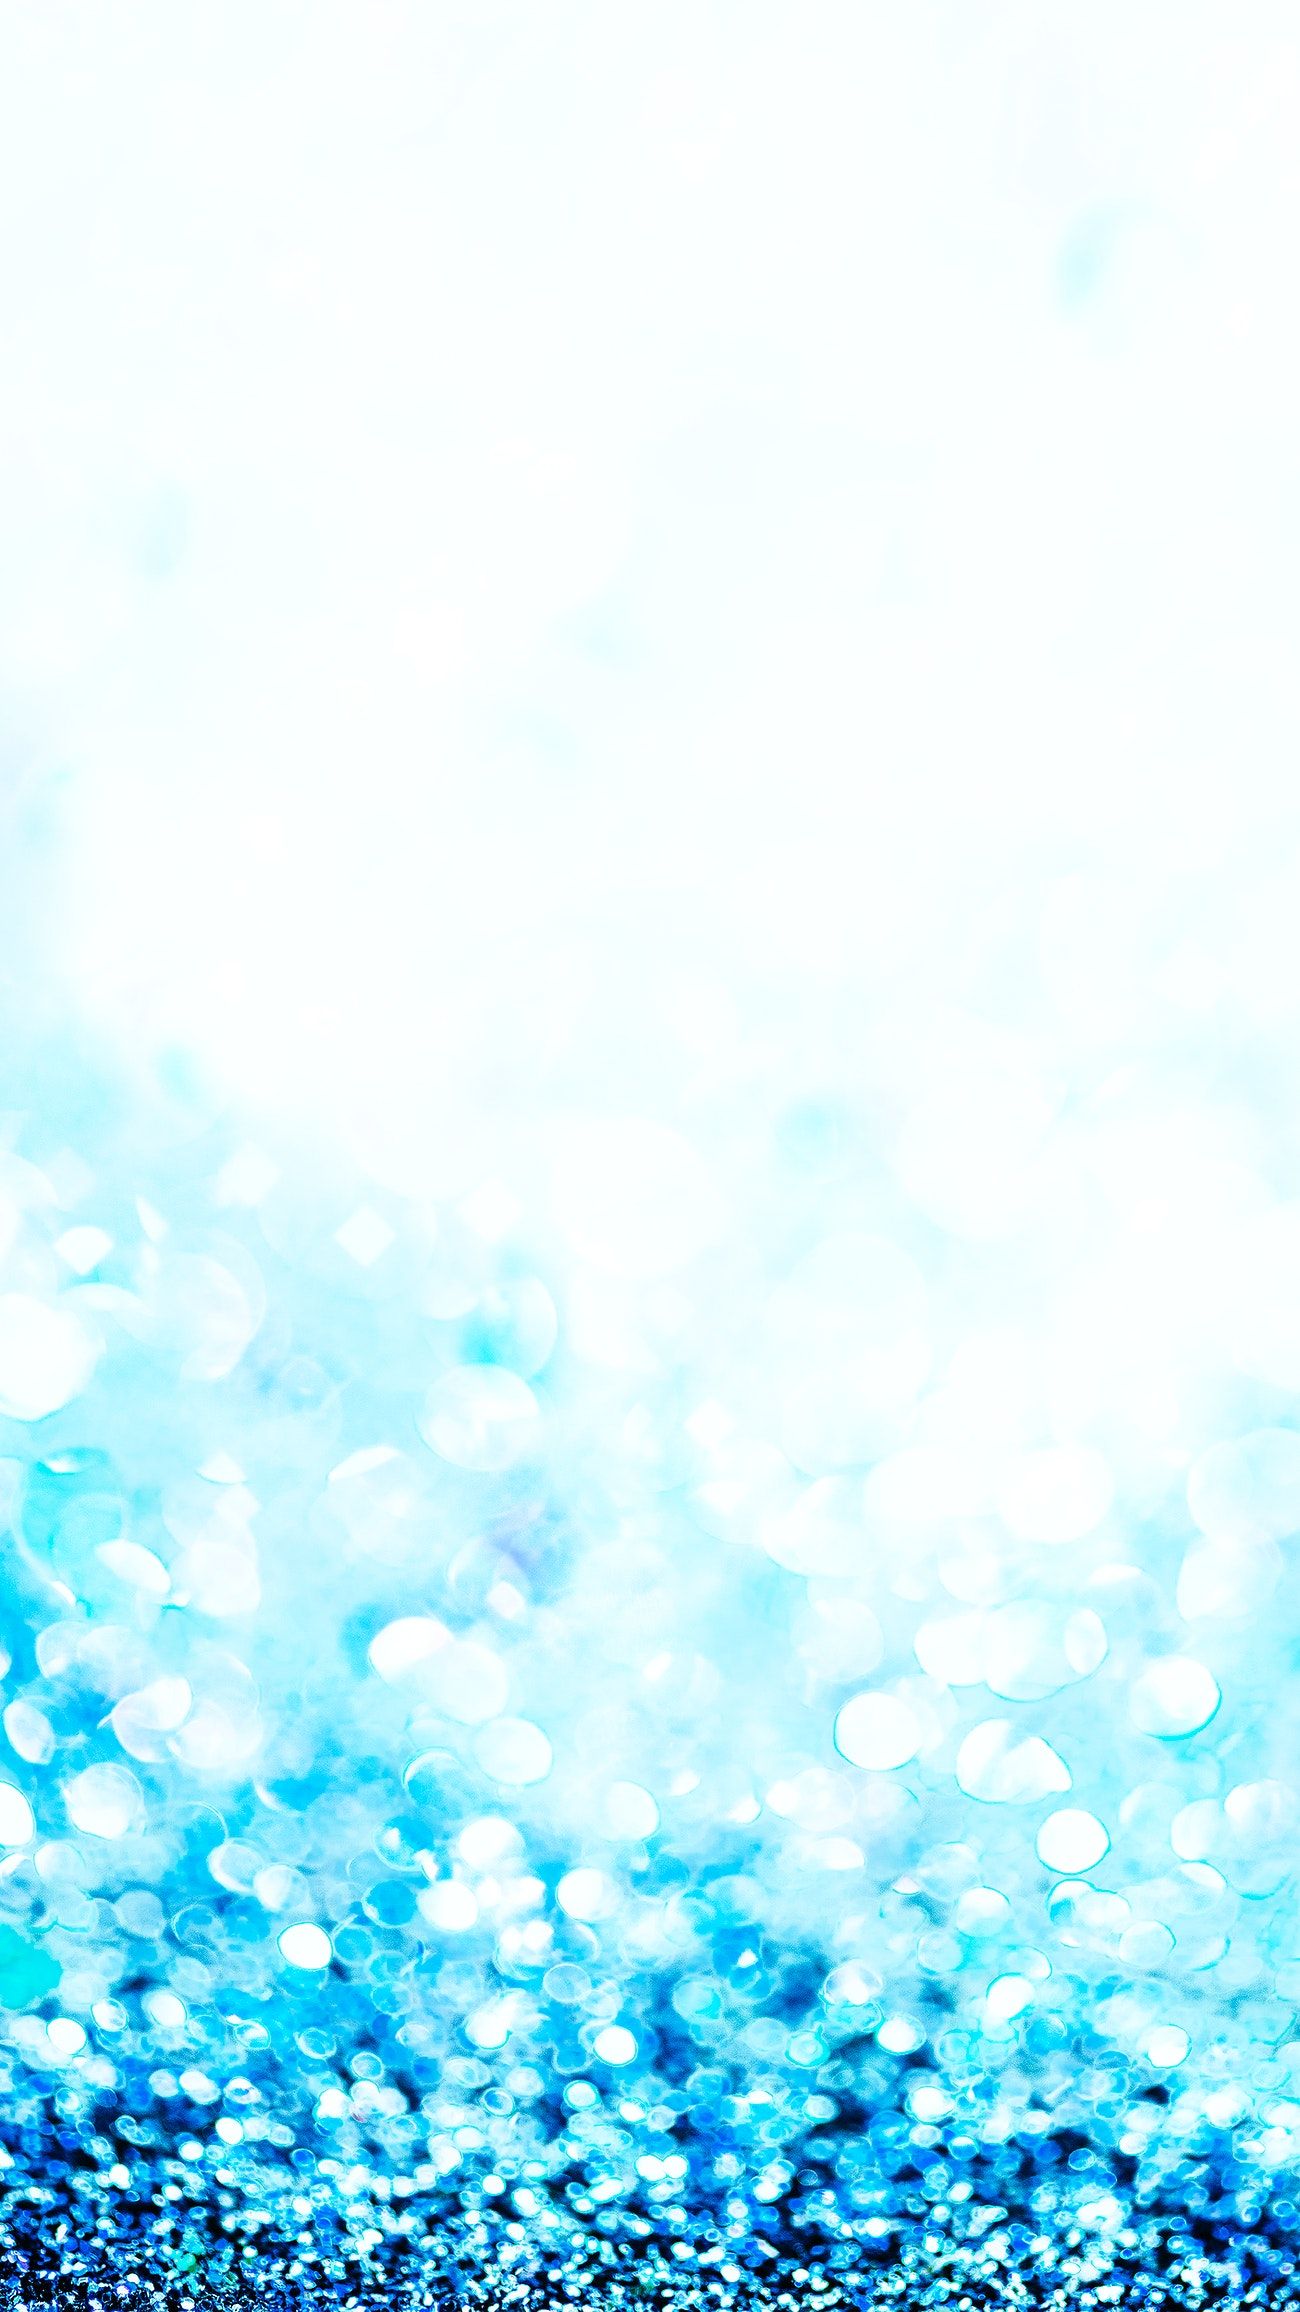 Shiny blue glitter textured mobile wallpaper. Royalty free photo